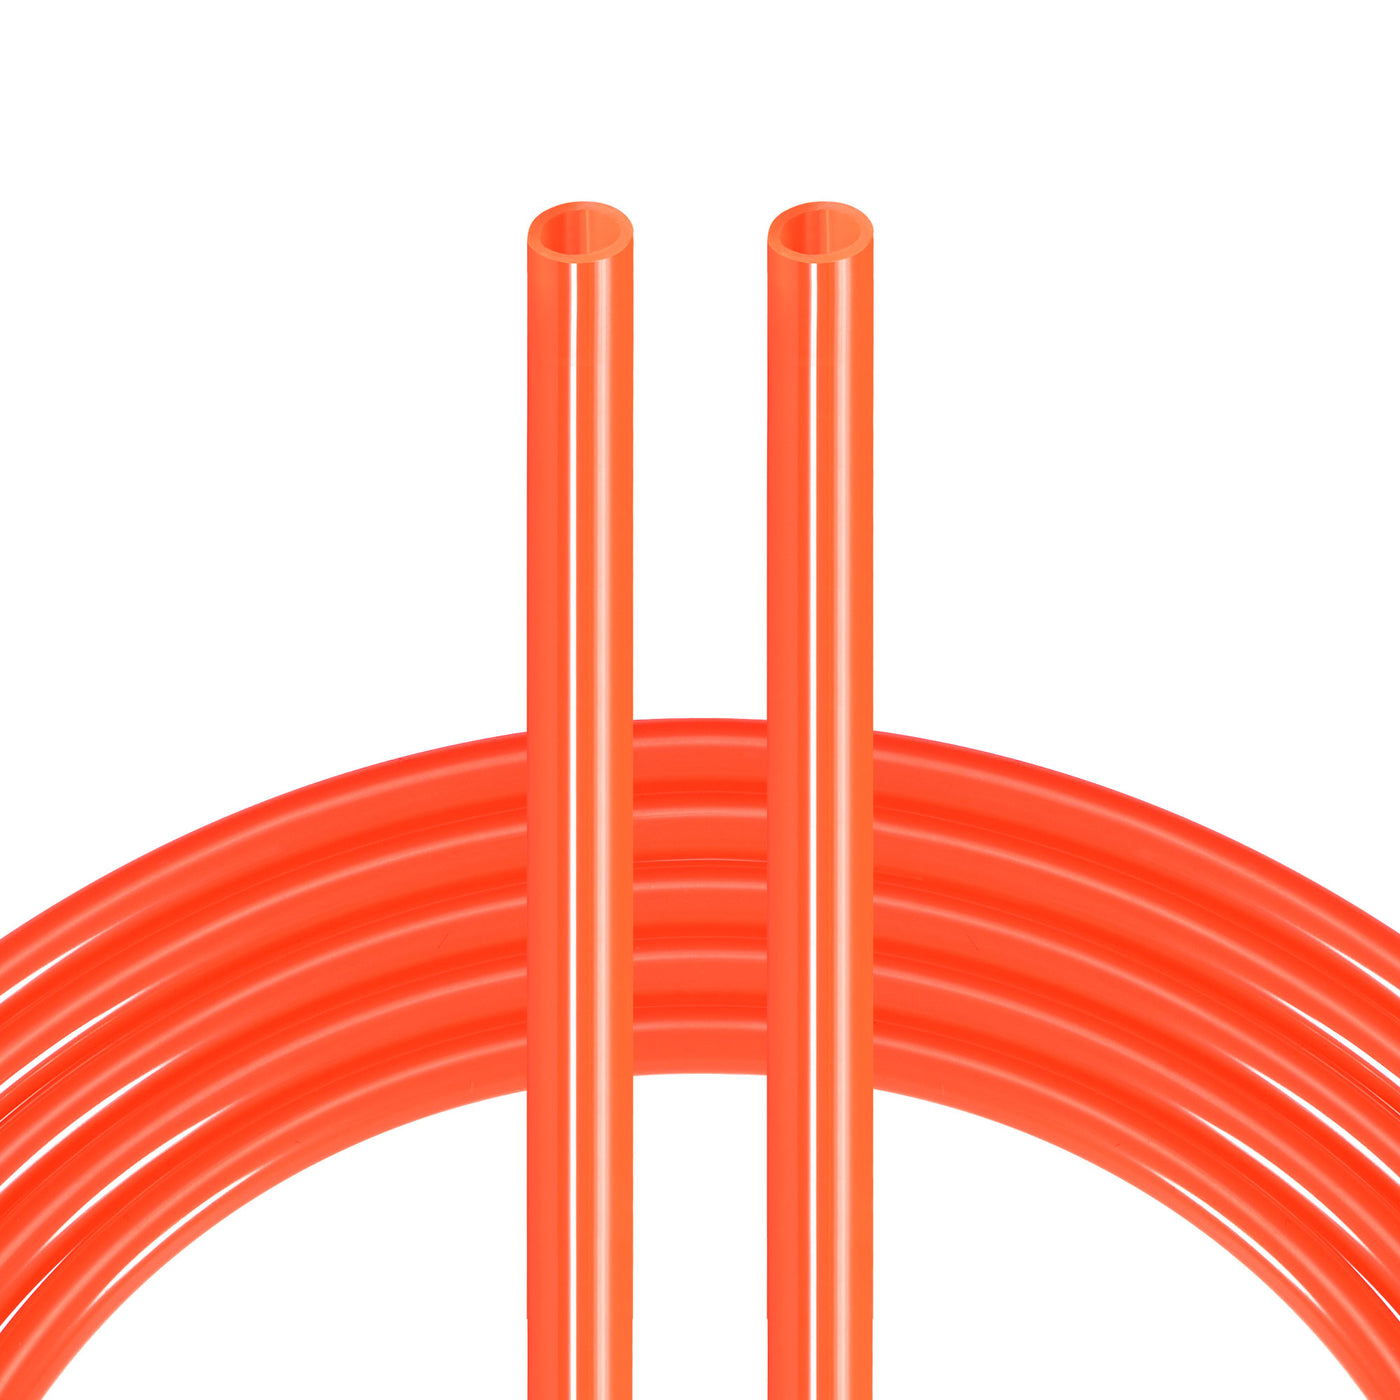 uxcell Uxcell Pneumatic Air Hose Tubing Air Compressor Tube 4mm/0.16''ID x 6mm/0.23''OD x 8m/26.2Ft Polyurethane Pipe Bright Orange